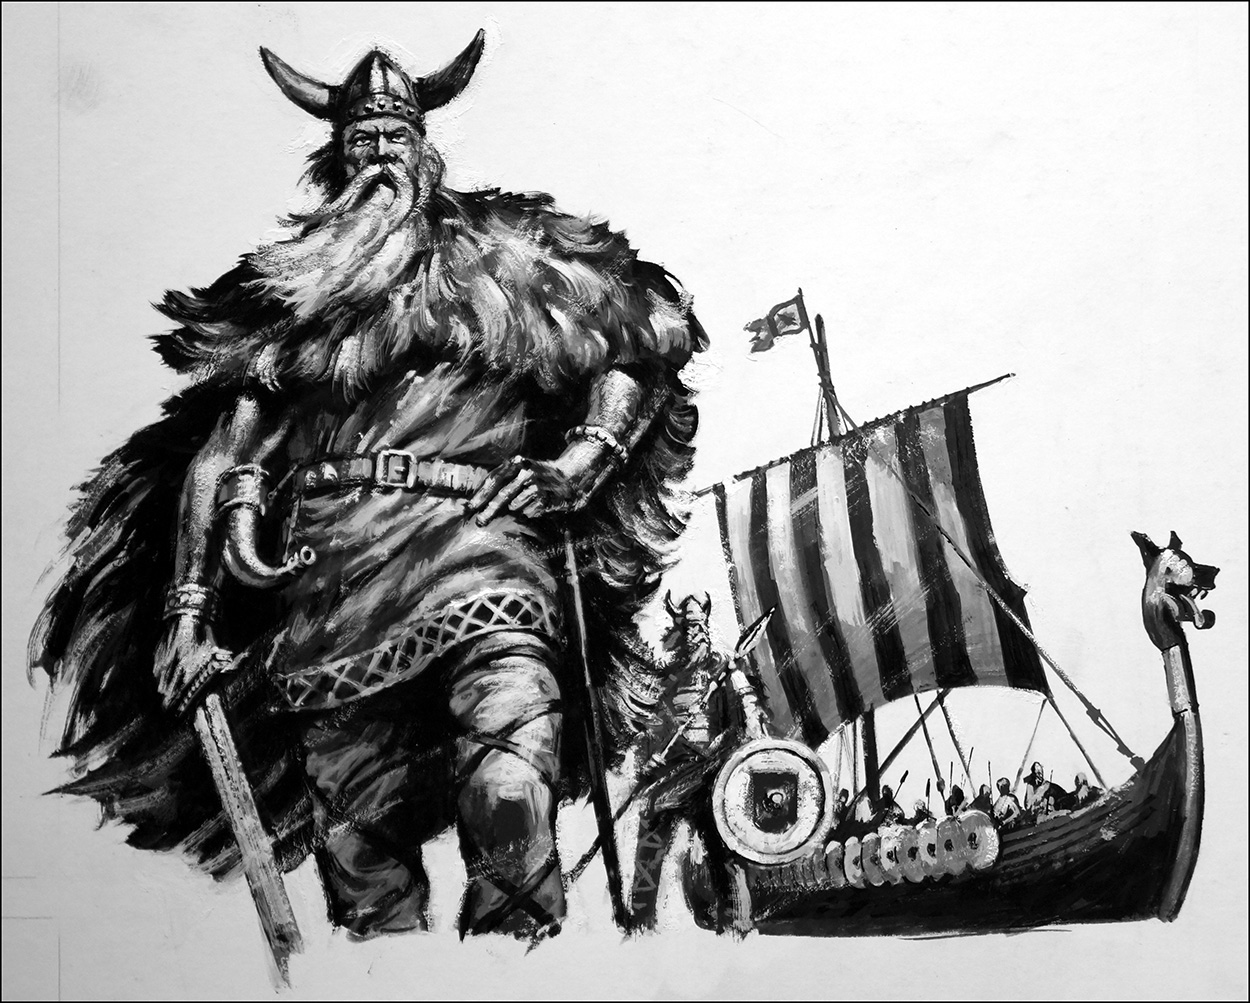 The Vikings (Original) art by Harry Green at The Illustration Art Gallery